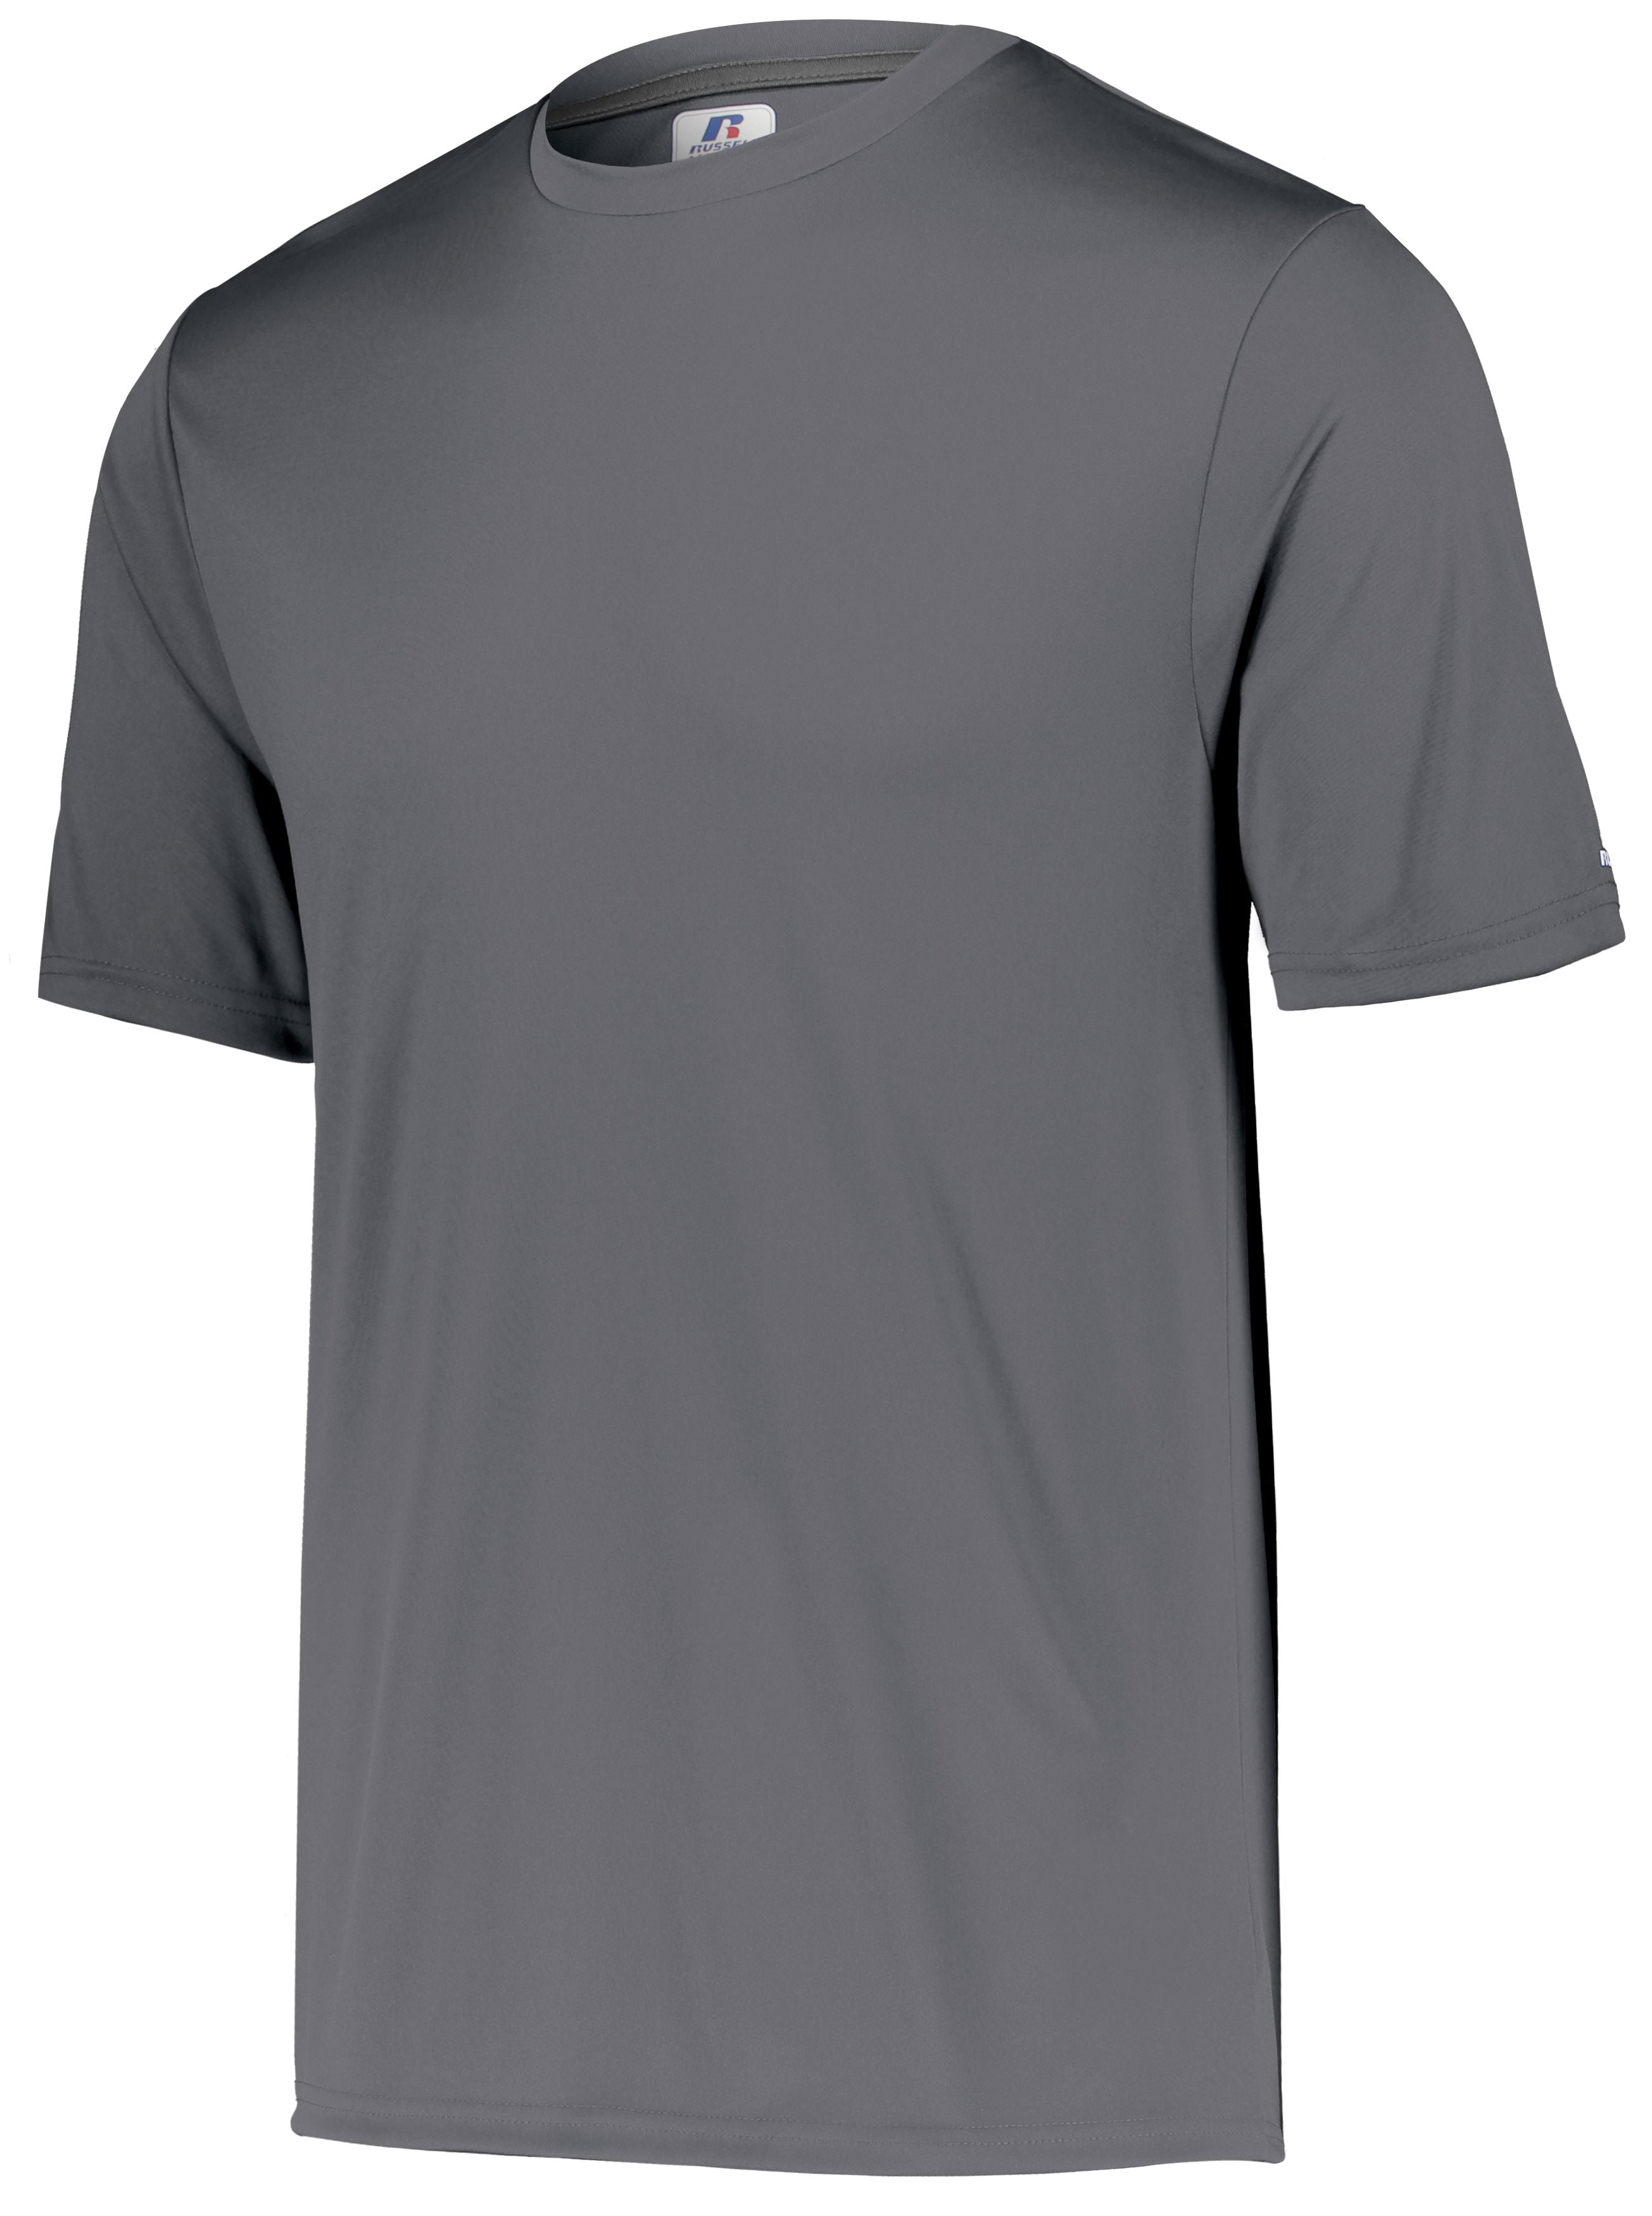 Russell Athletic Dri-Power Core Performance Tee in Steel  -Part of the Adult, Adult-Tee-Shirt, T-Shirts, Russell-Athletic-Products, Shirts product lines at KanaleyCreations.com